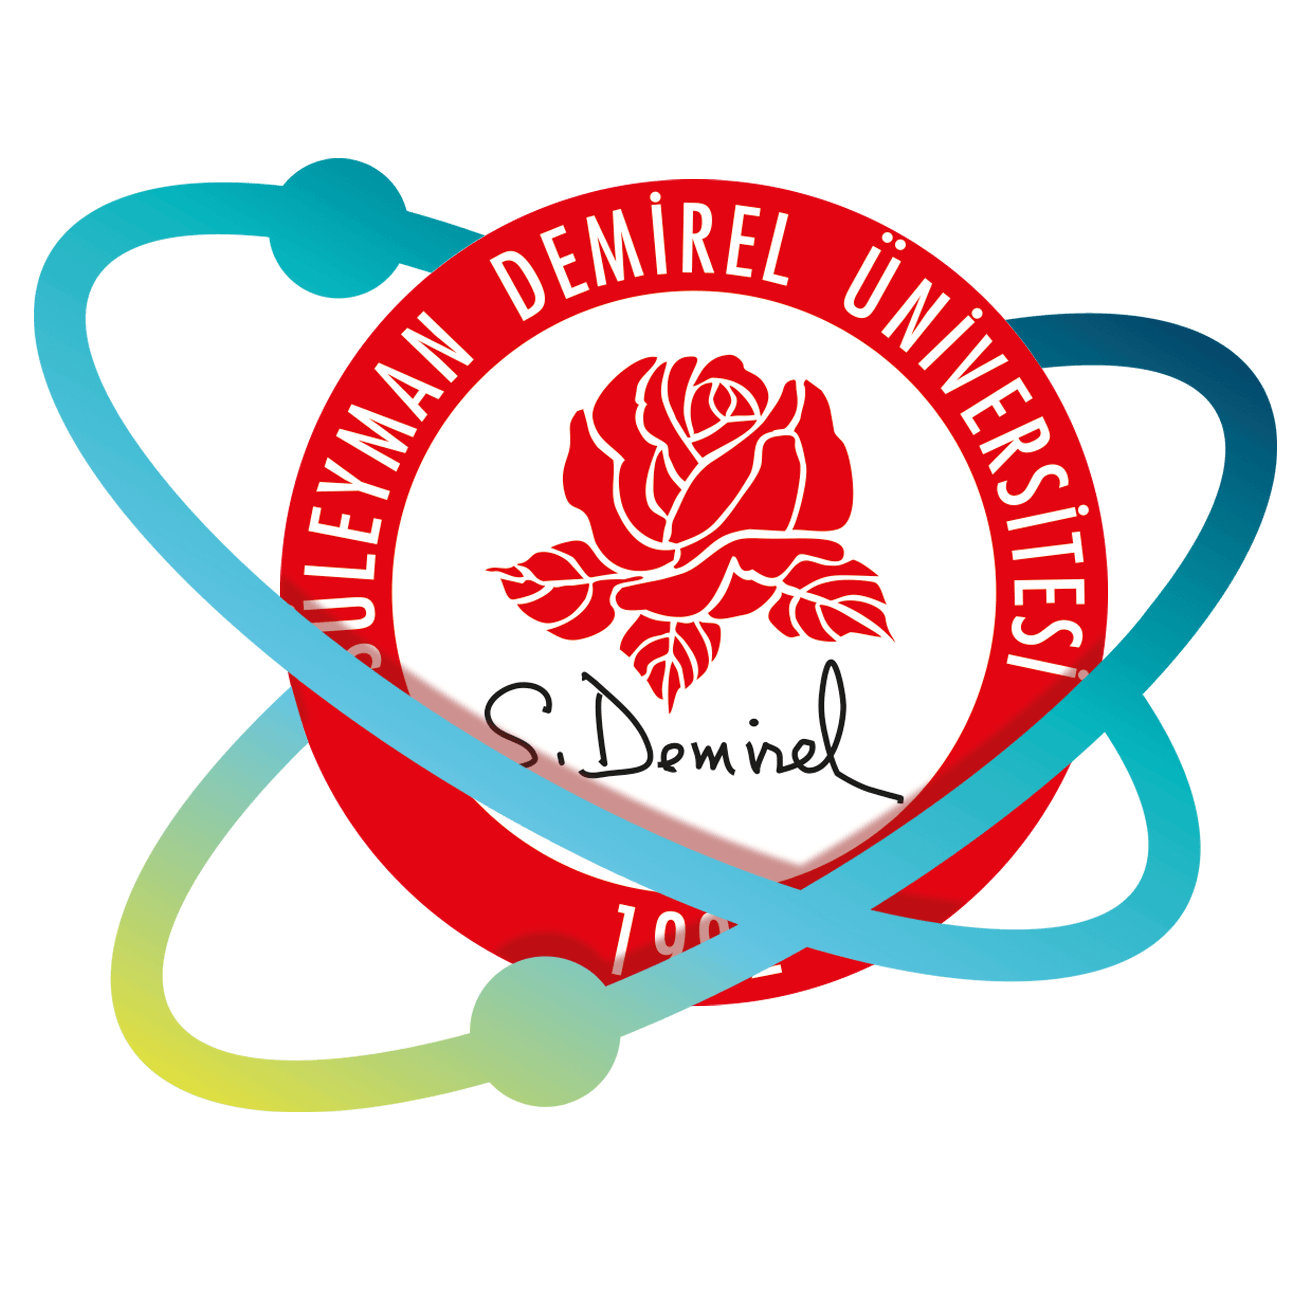 Suleyman Demirel University Research and Innovation Directorate